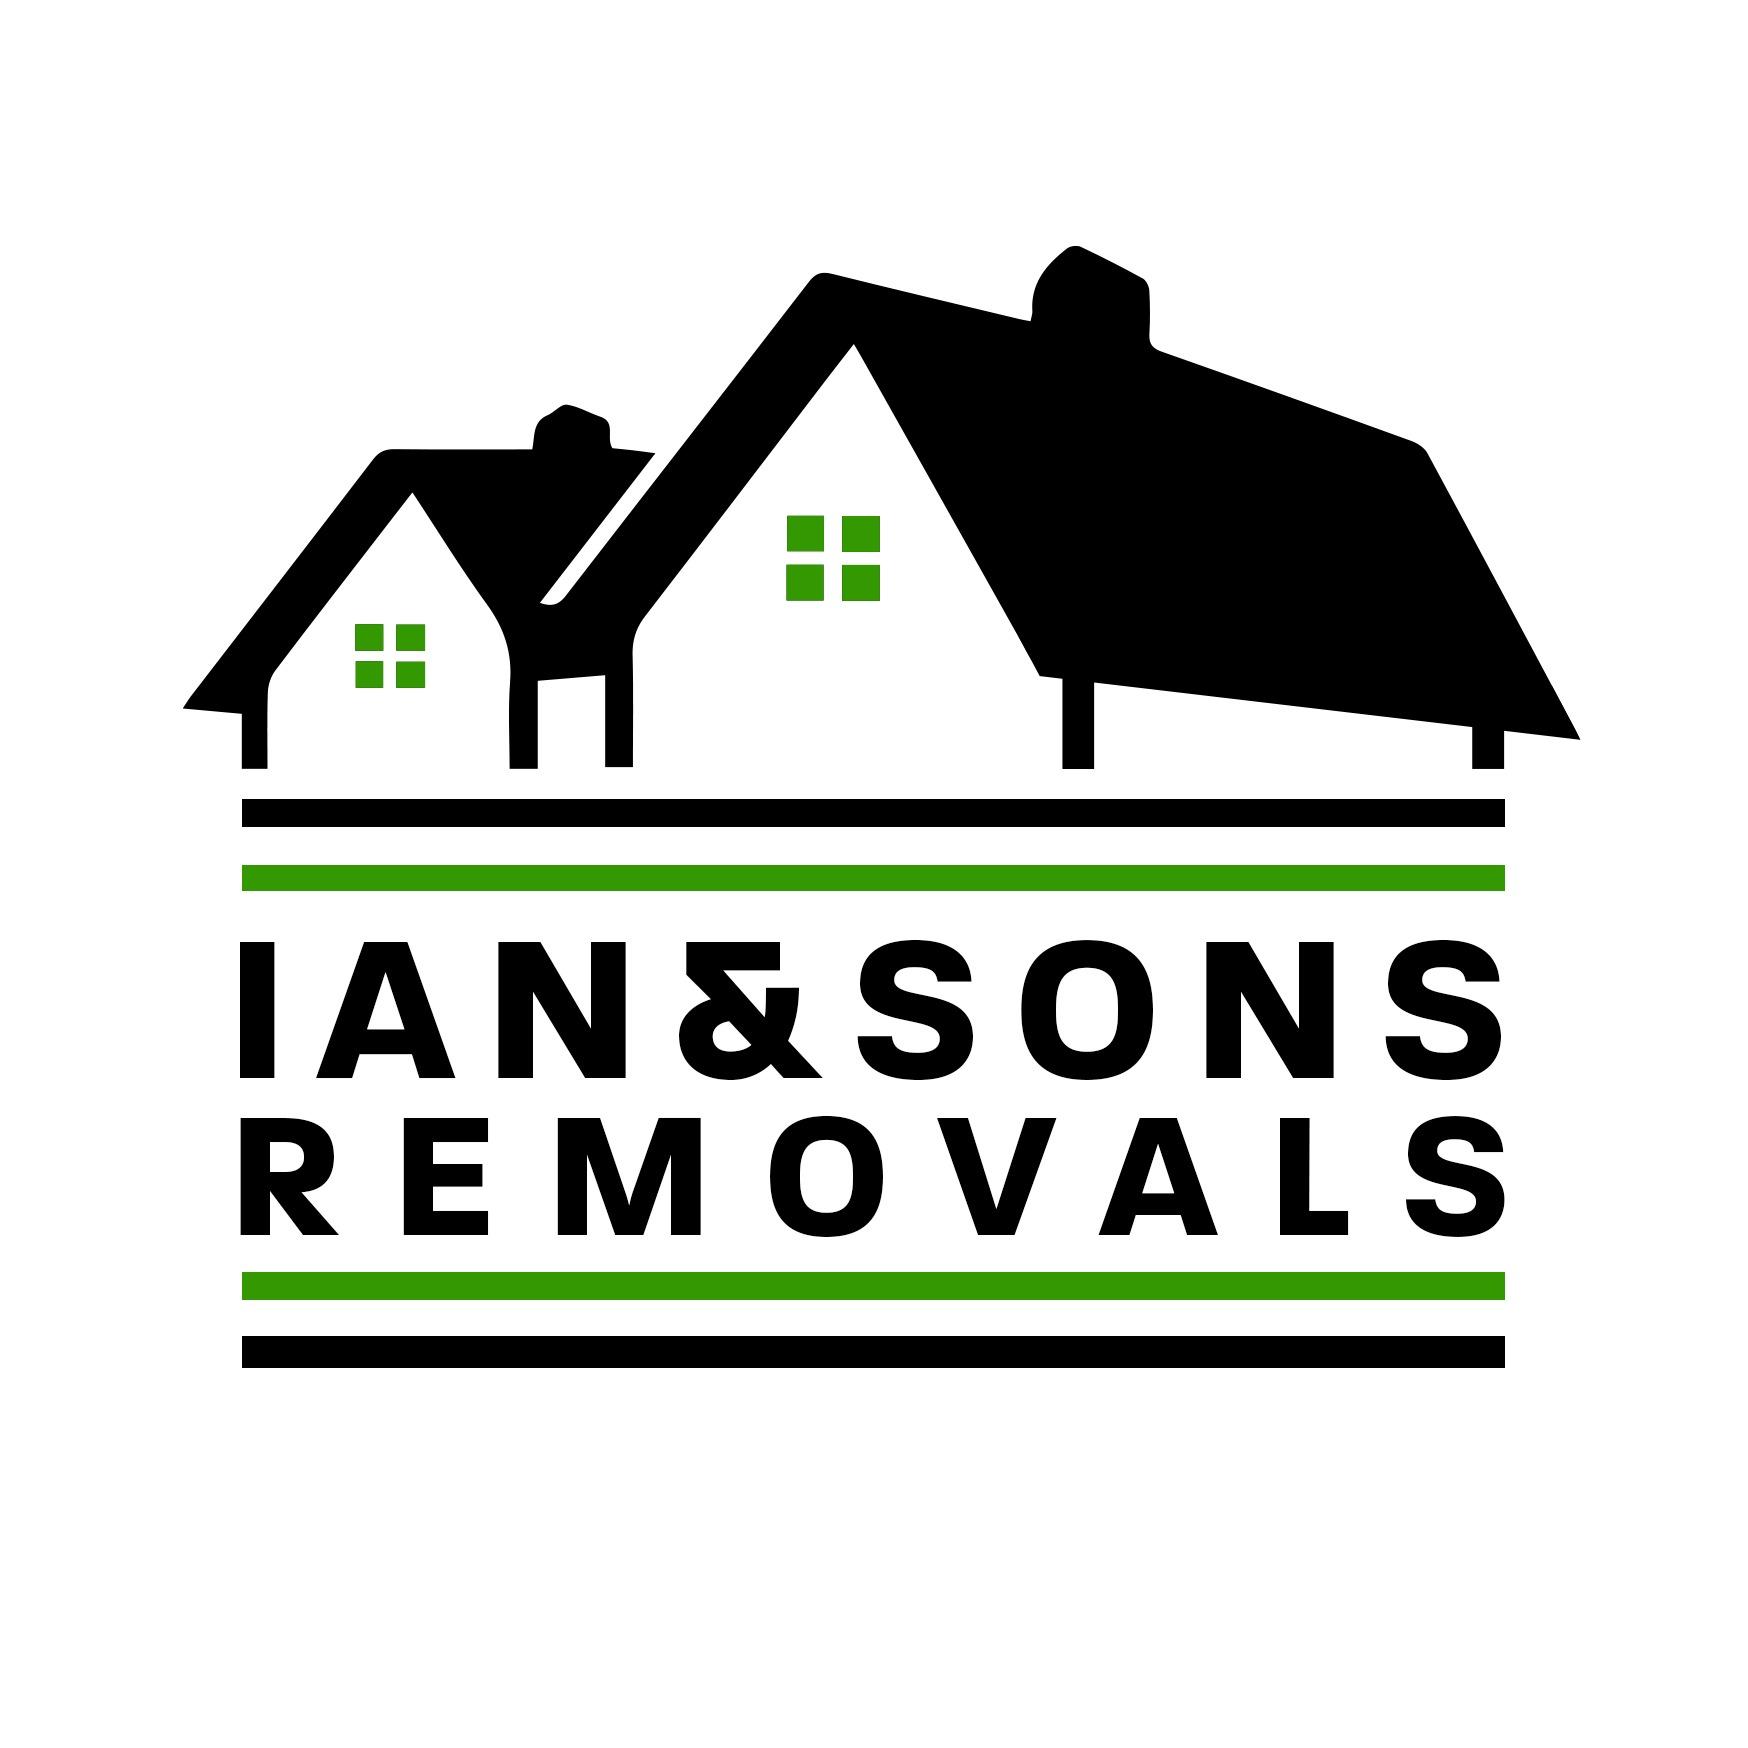 Ian and Sons Removals - Southend-on-Sea, Essex SS2 4HX - 01702 870039 | ShowMeLocal.com